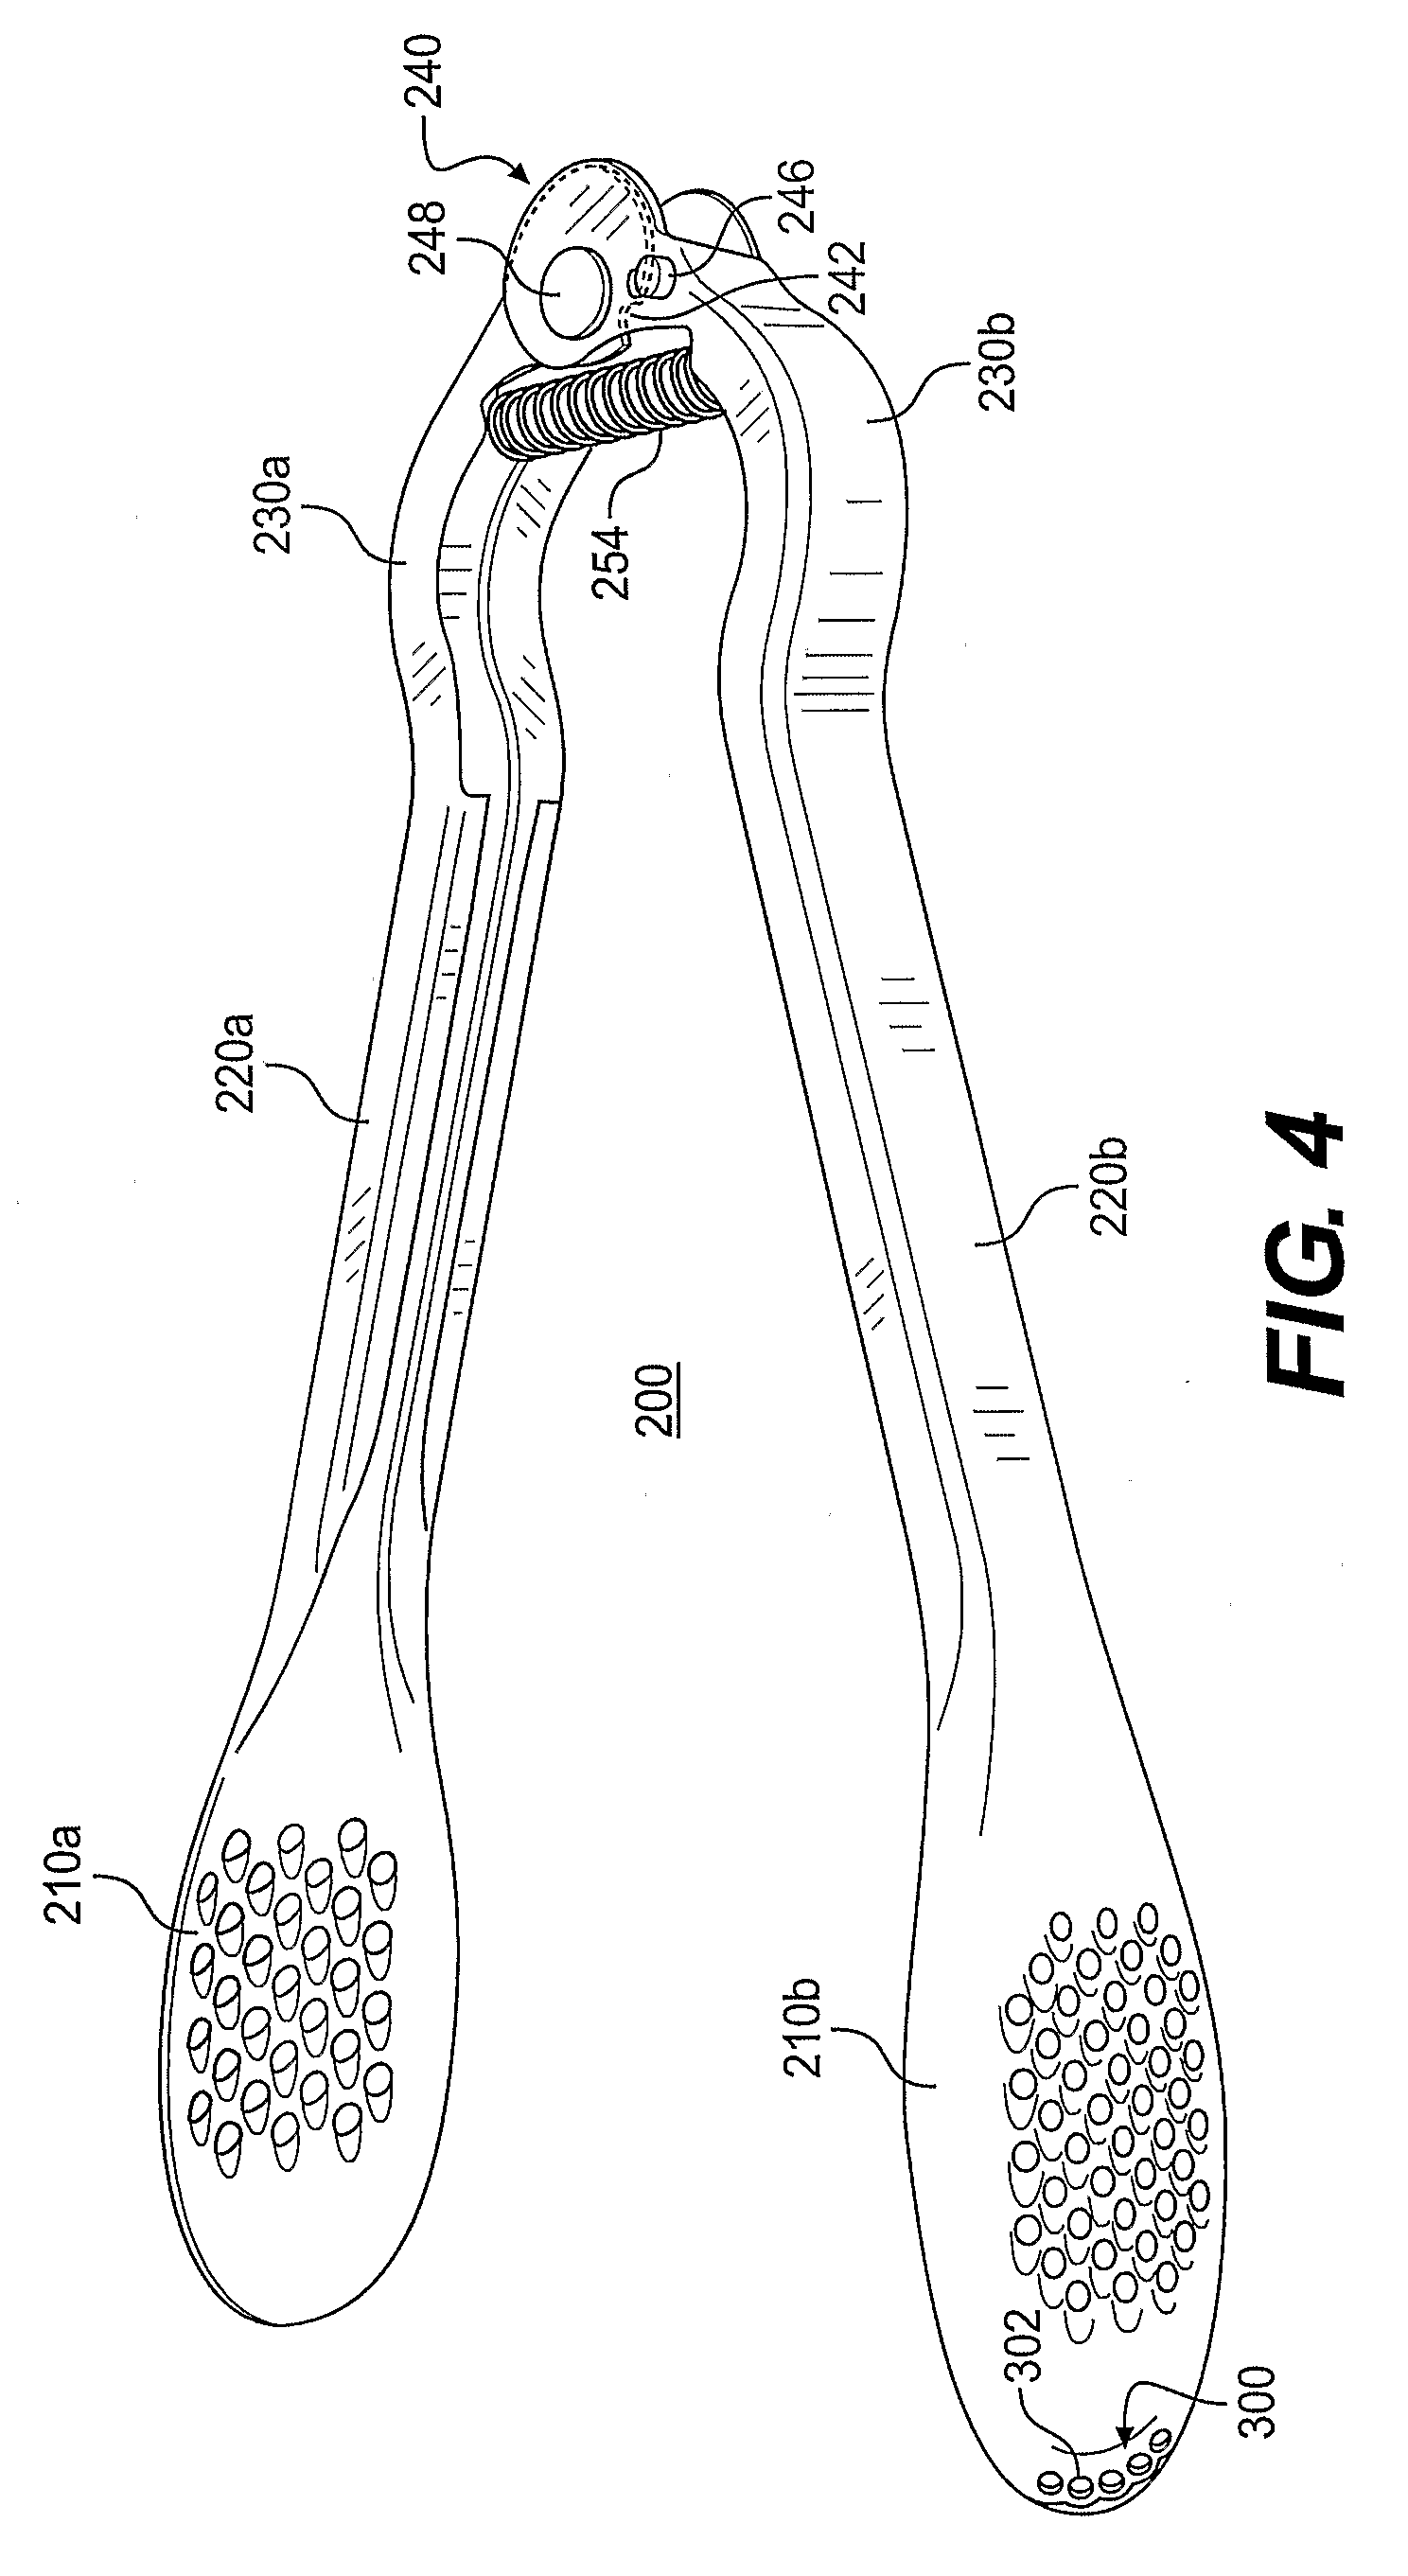 Spoon-shaped grating implement